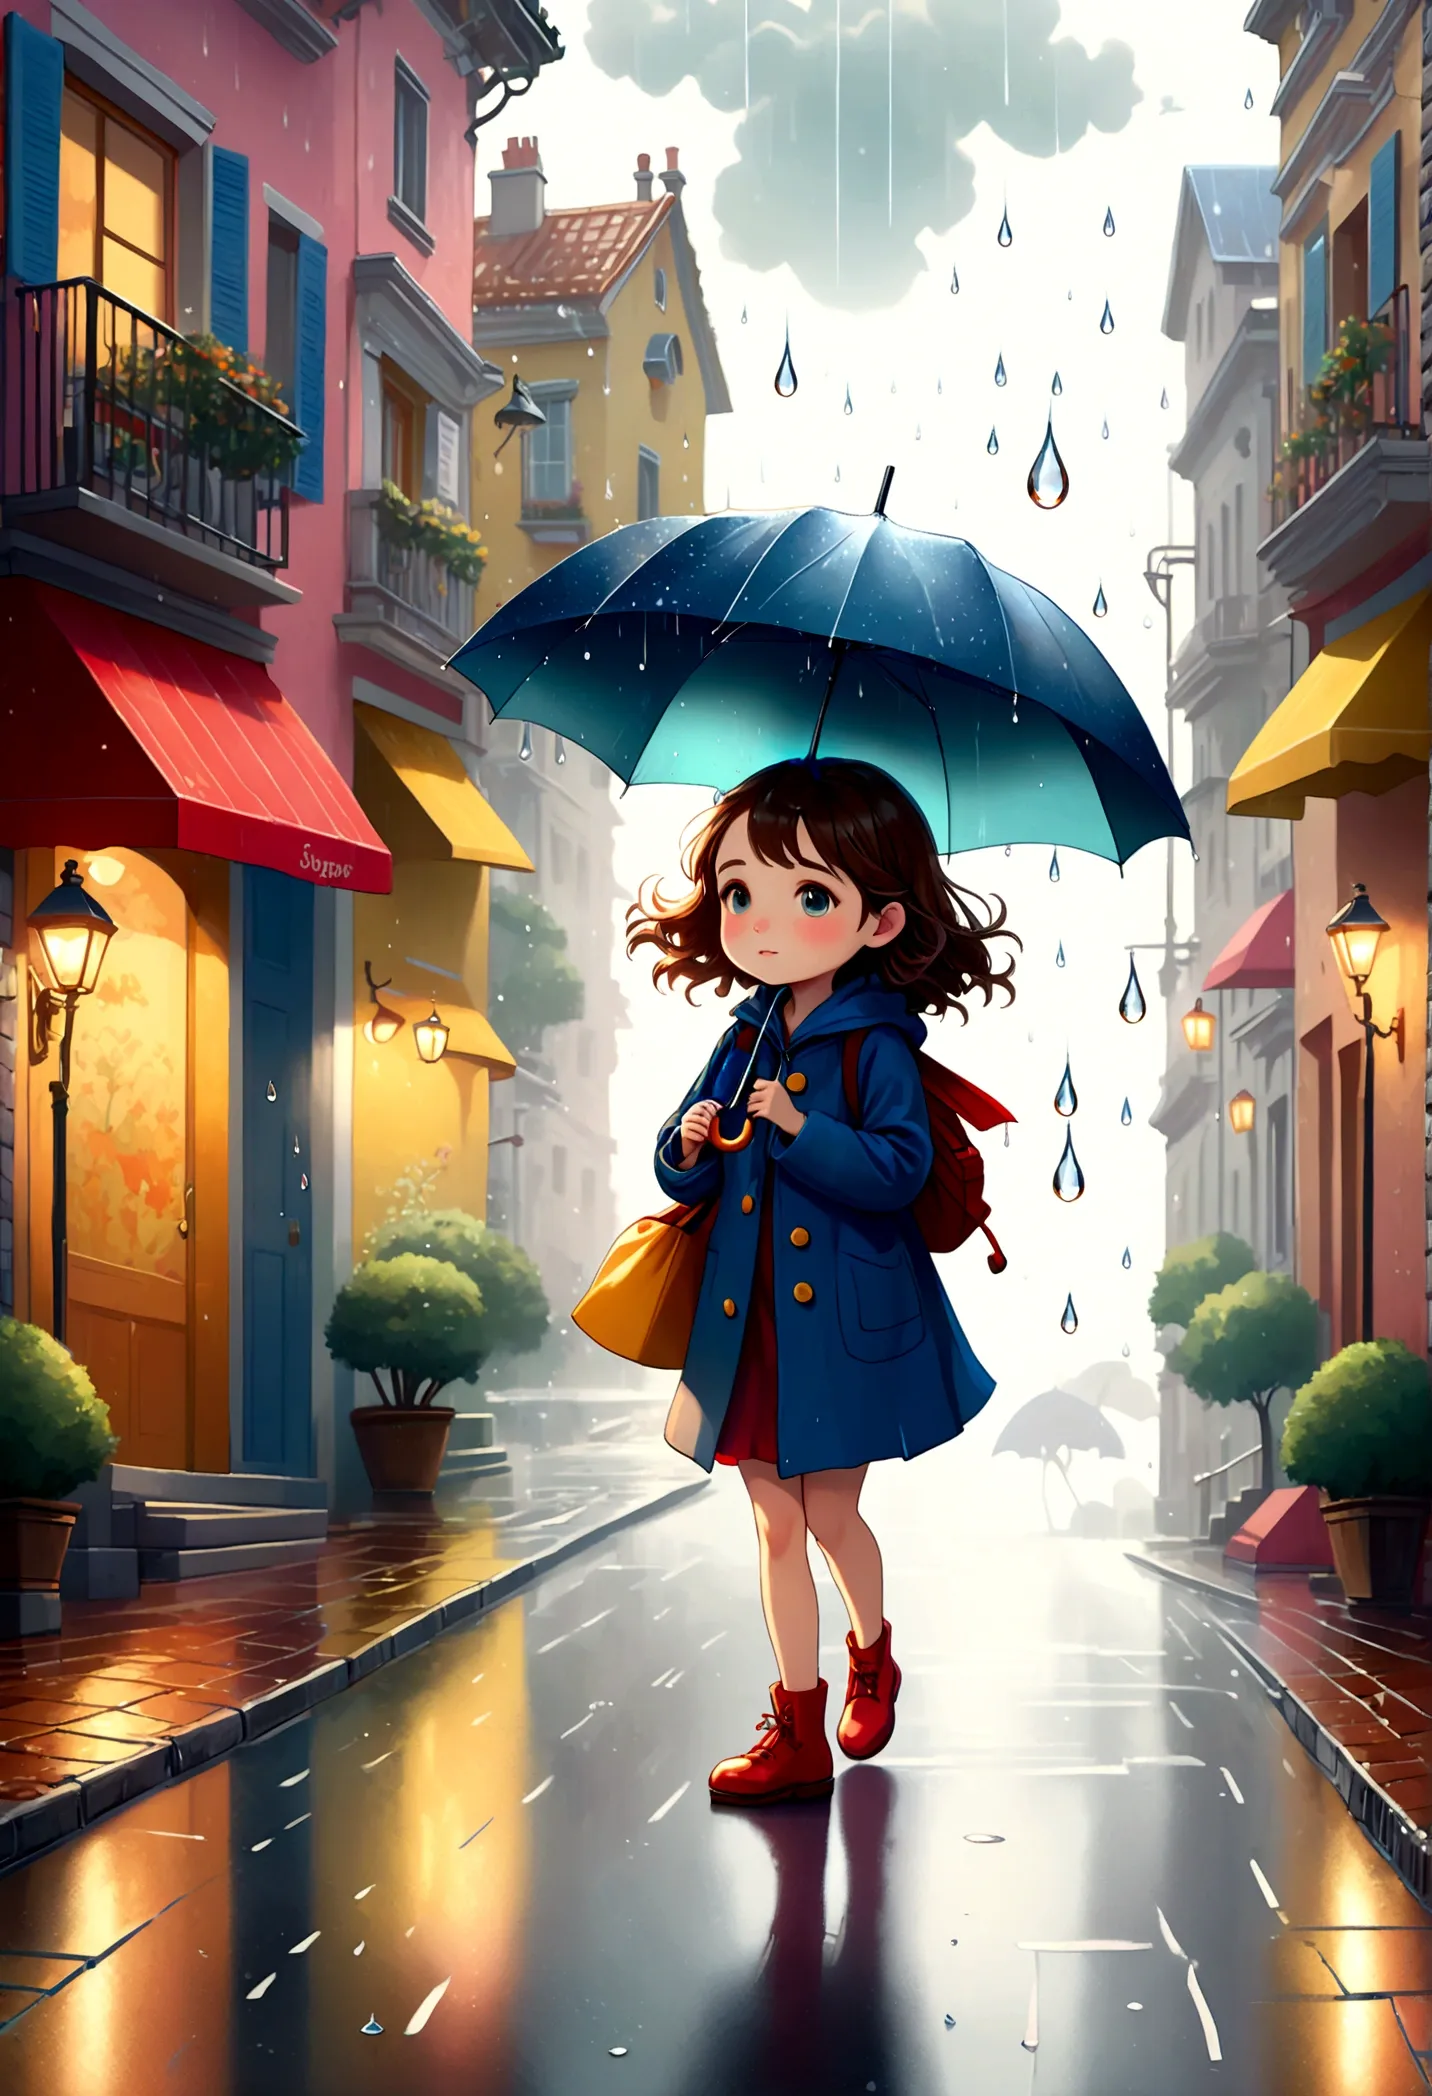 Fixes,Cute illustration: Landscape,Street corner on a rainy day,A landscape that looks like an illustration from a picture book,...